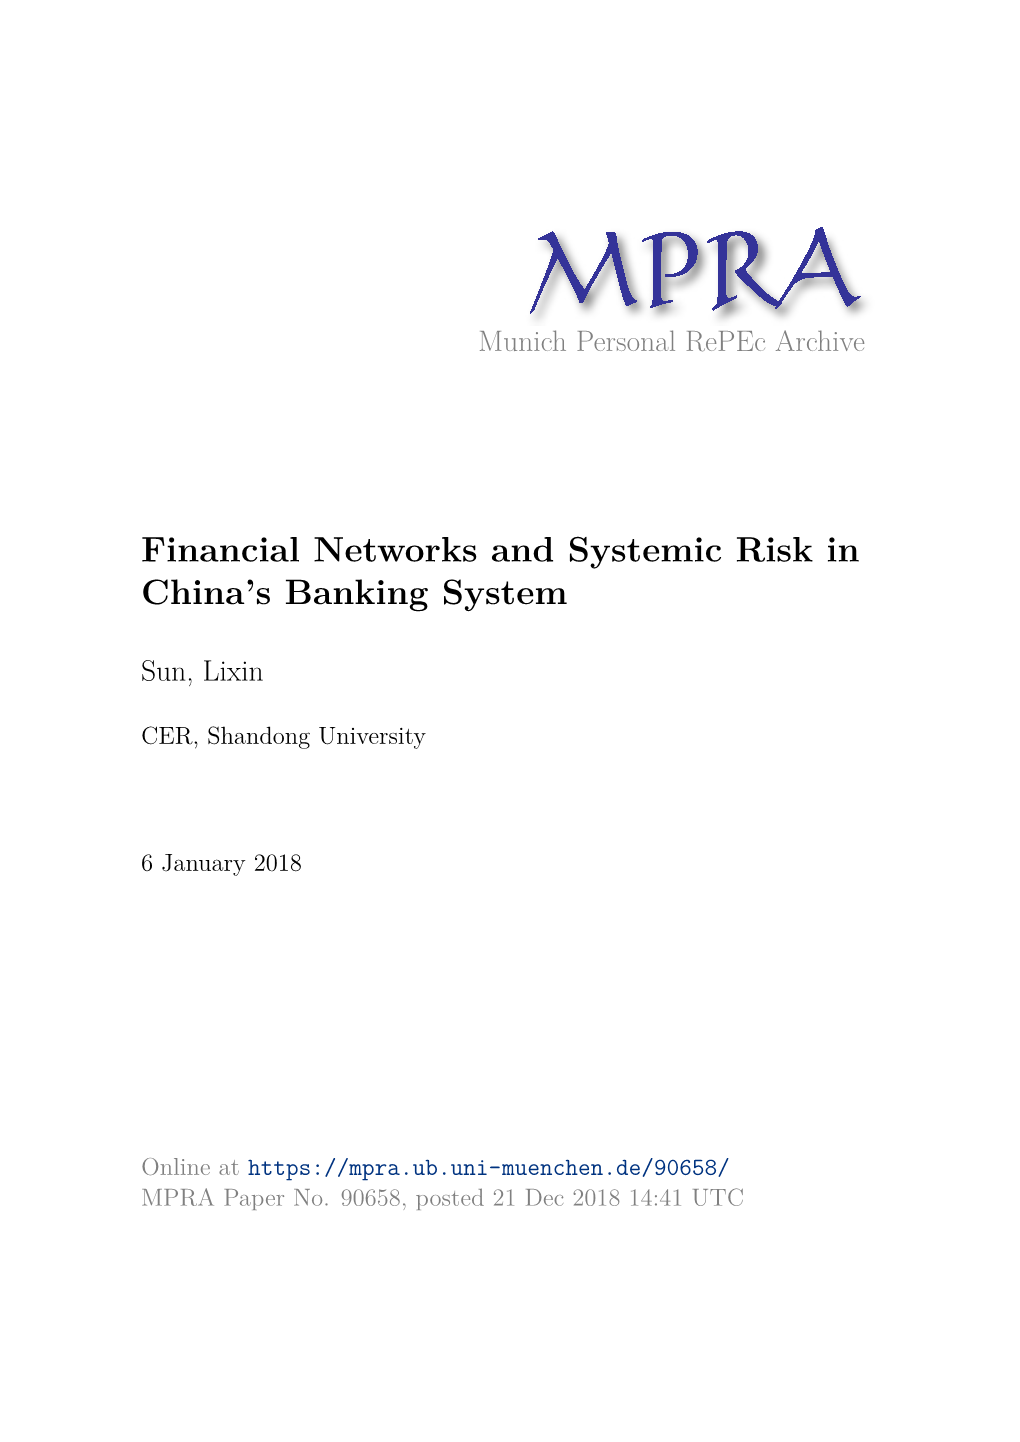 Financial Networks and Systemic Risk in China's Banking System